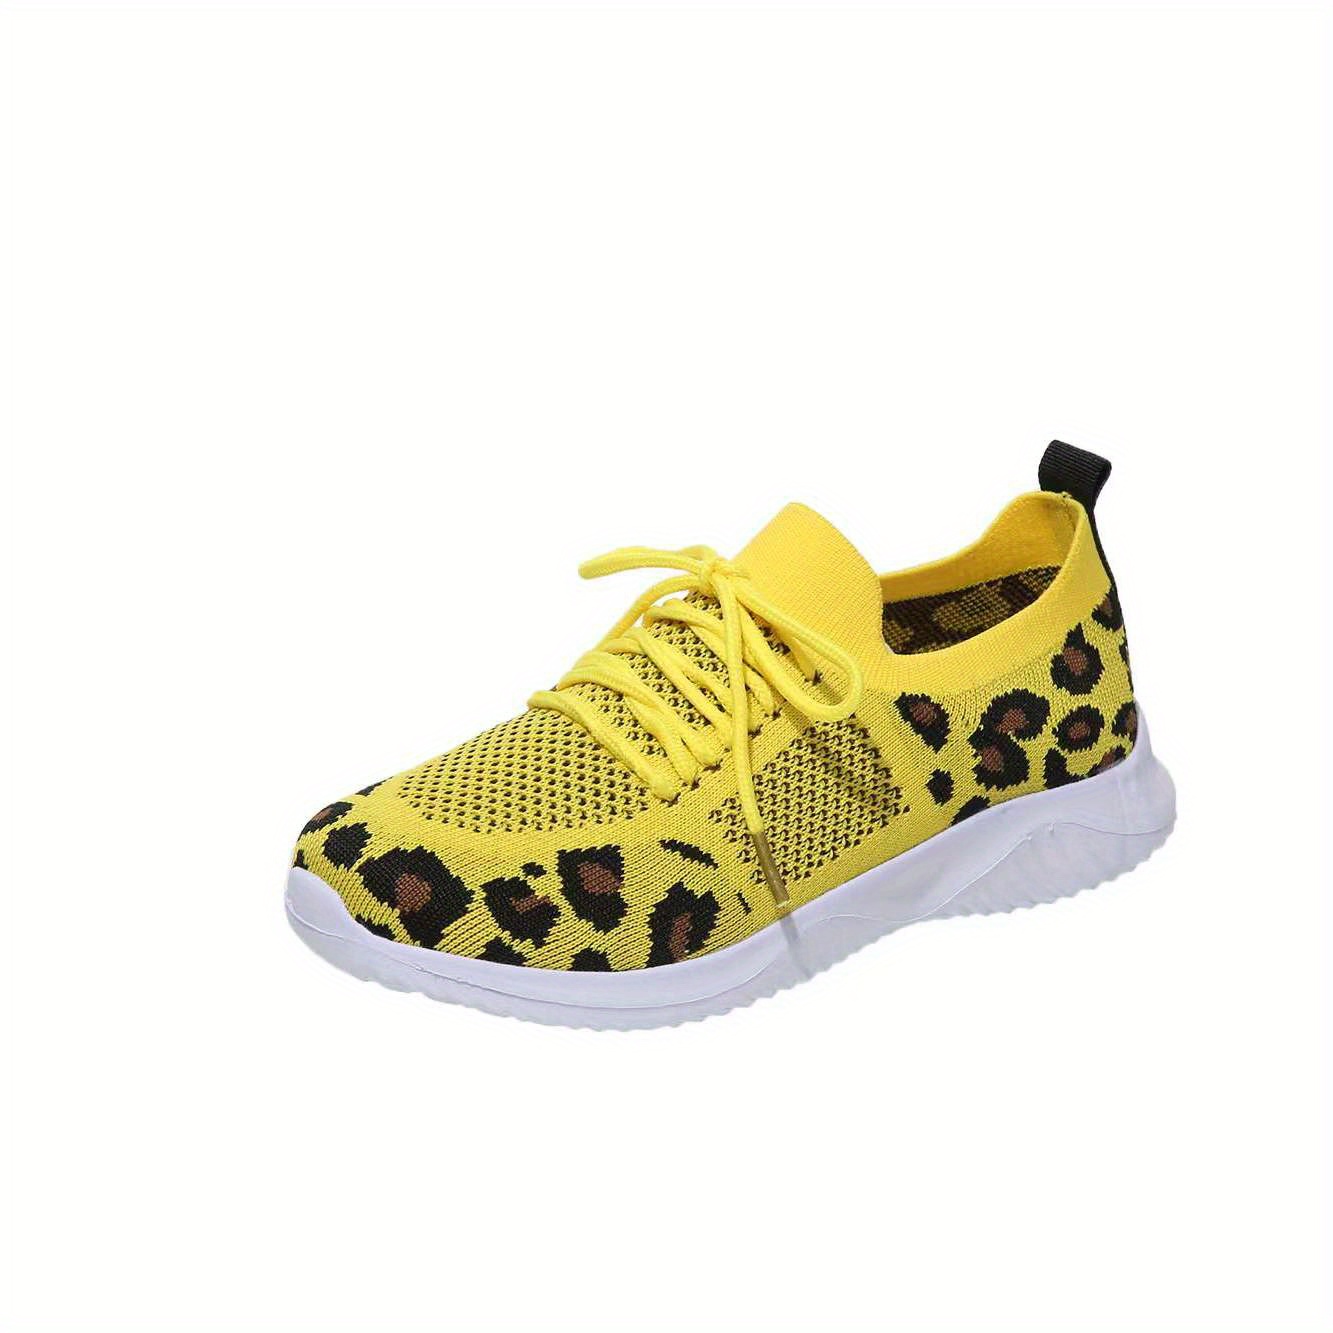 Under Armour MPZ Micro G Yellow Leopard Print Running Shoes Womens